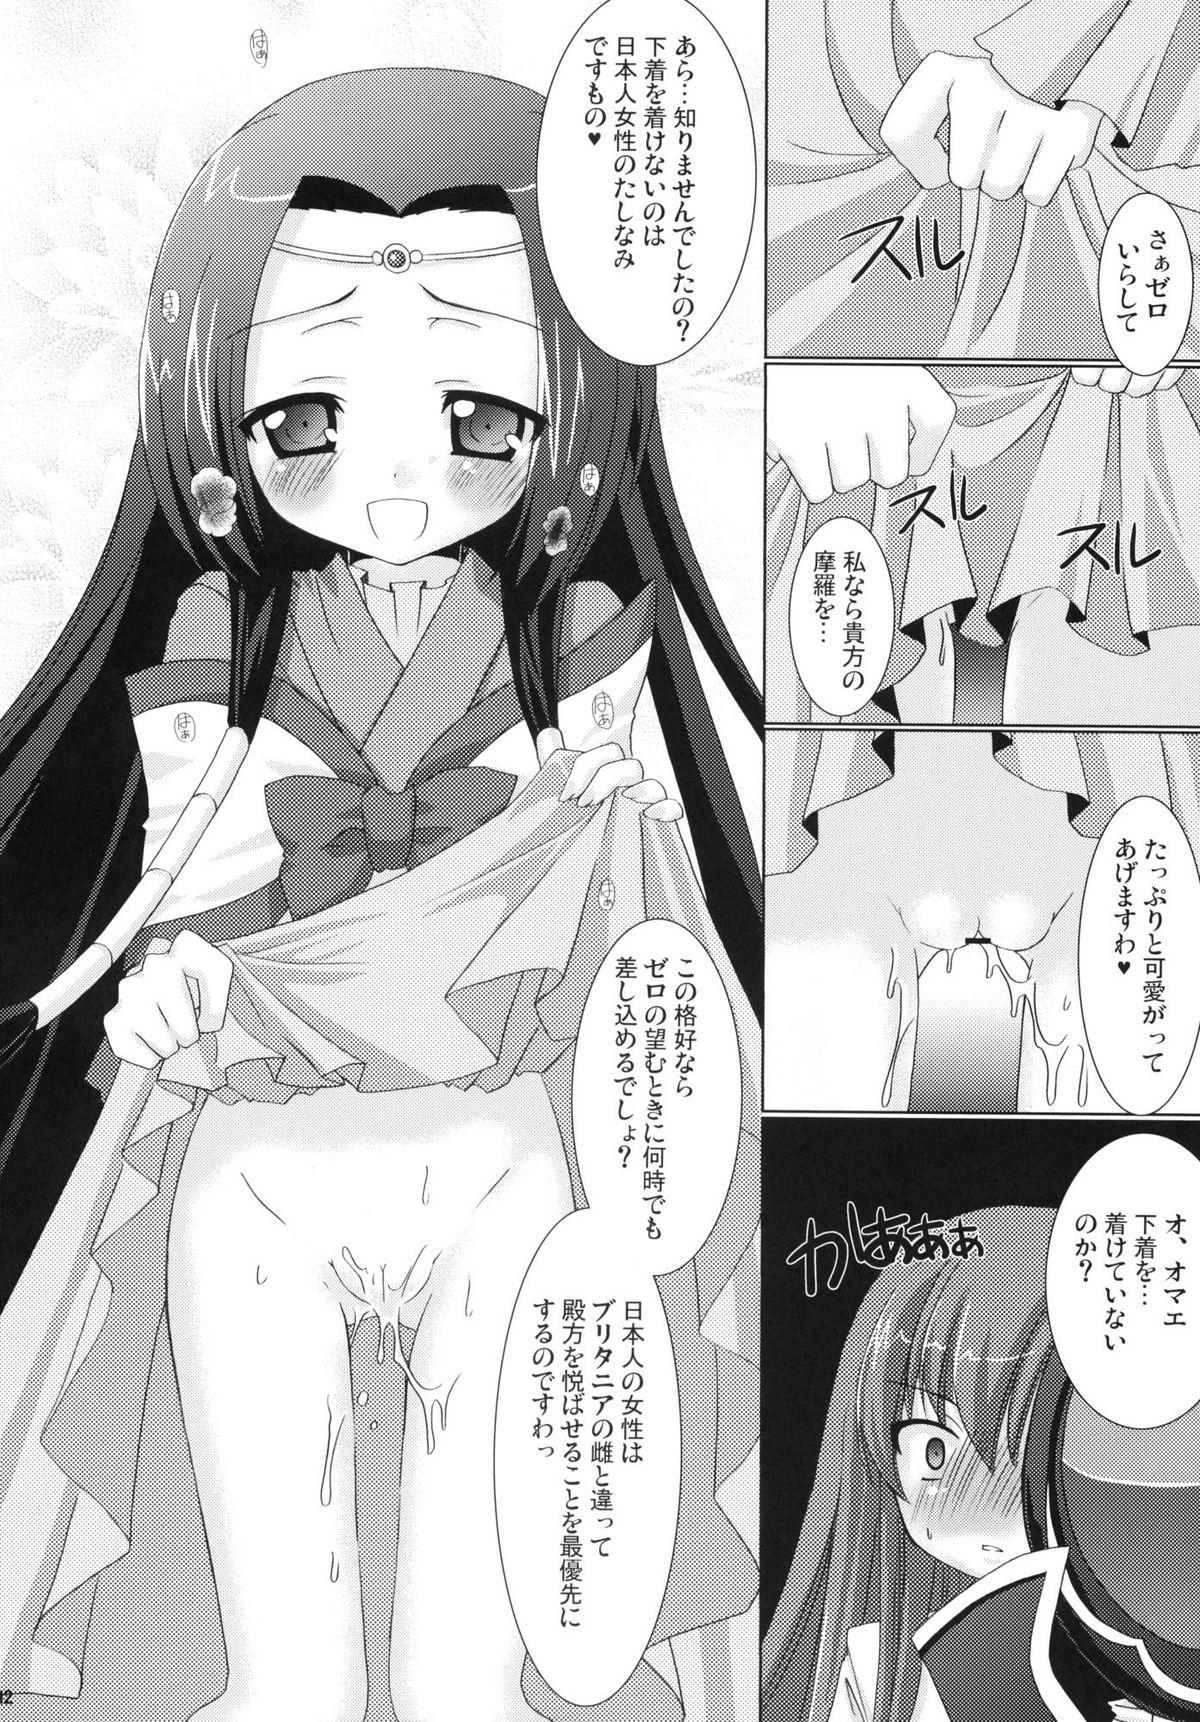 Babes Kouhime Kyouhime - Code geass Publico - Page 12